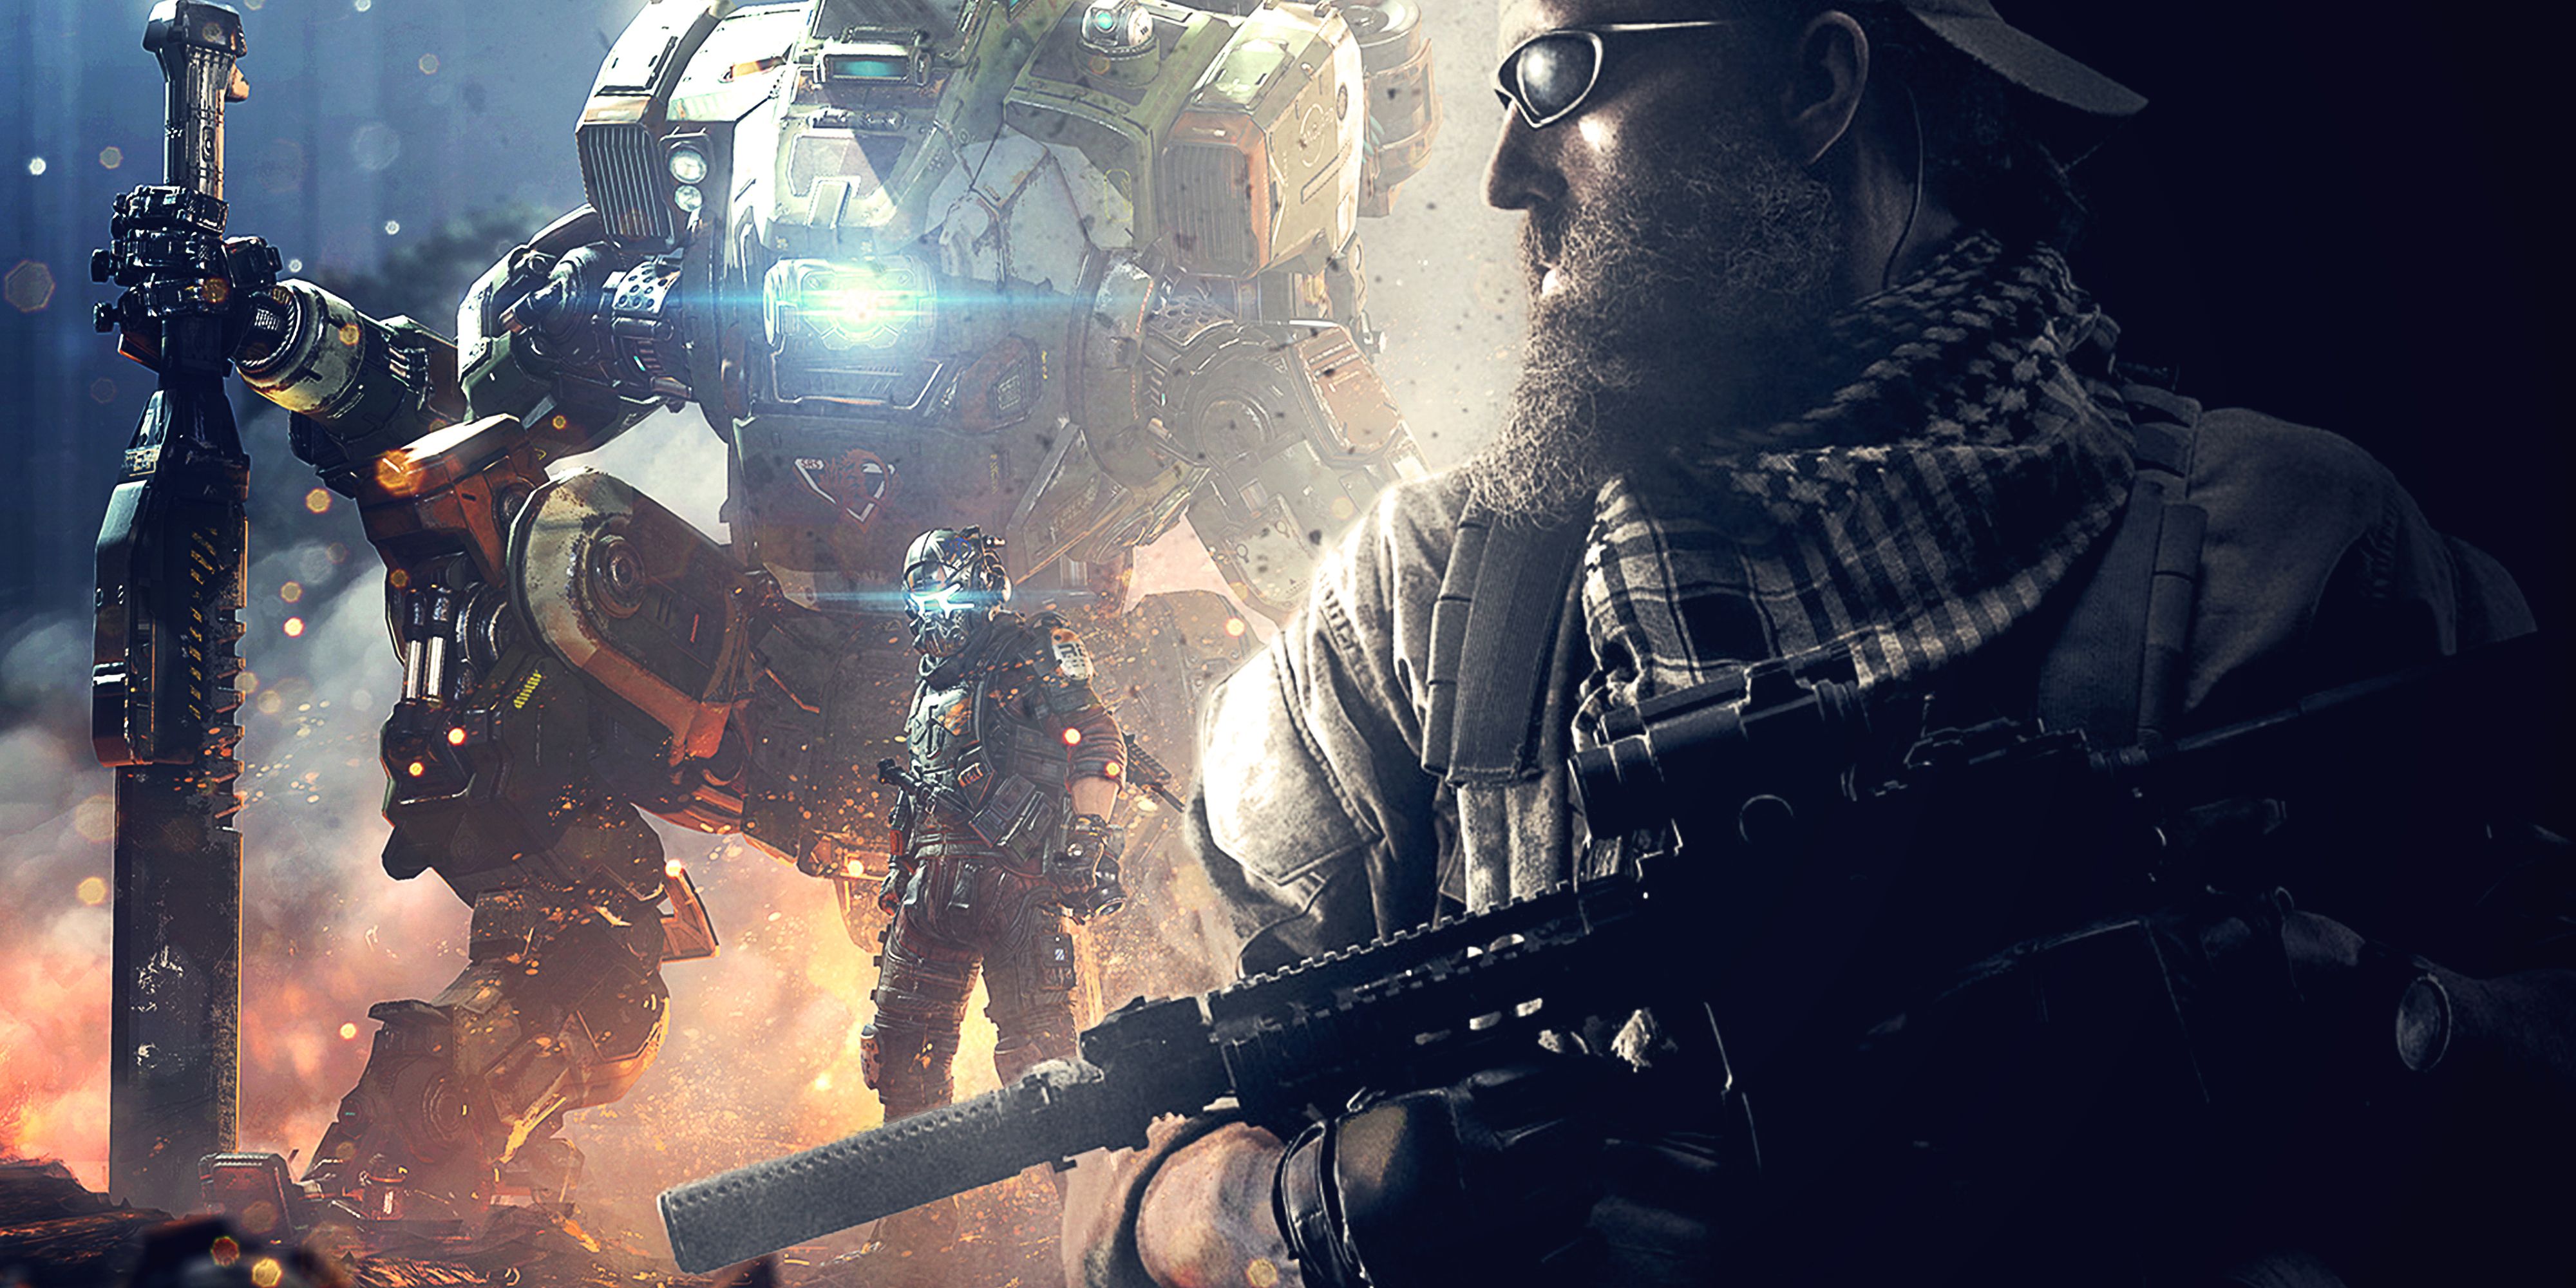 Characters from Titanfall 2 and a modern shooter